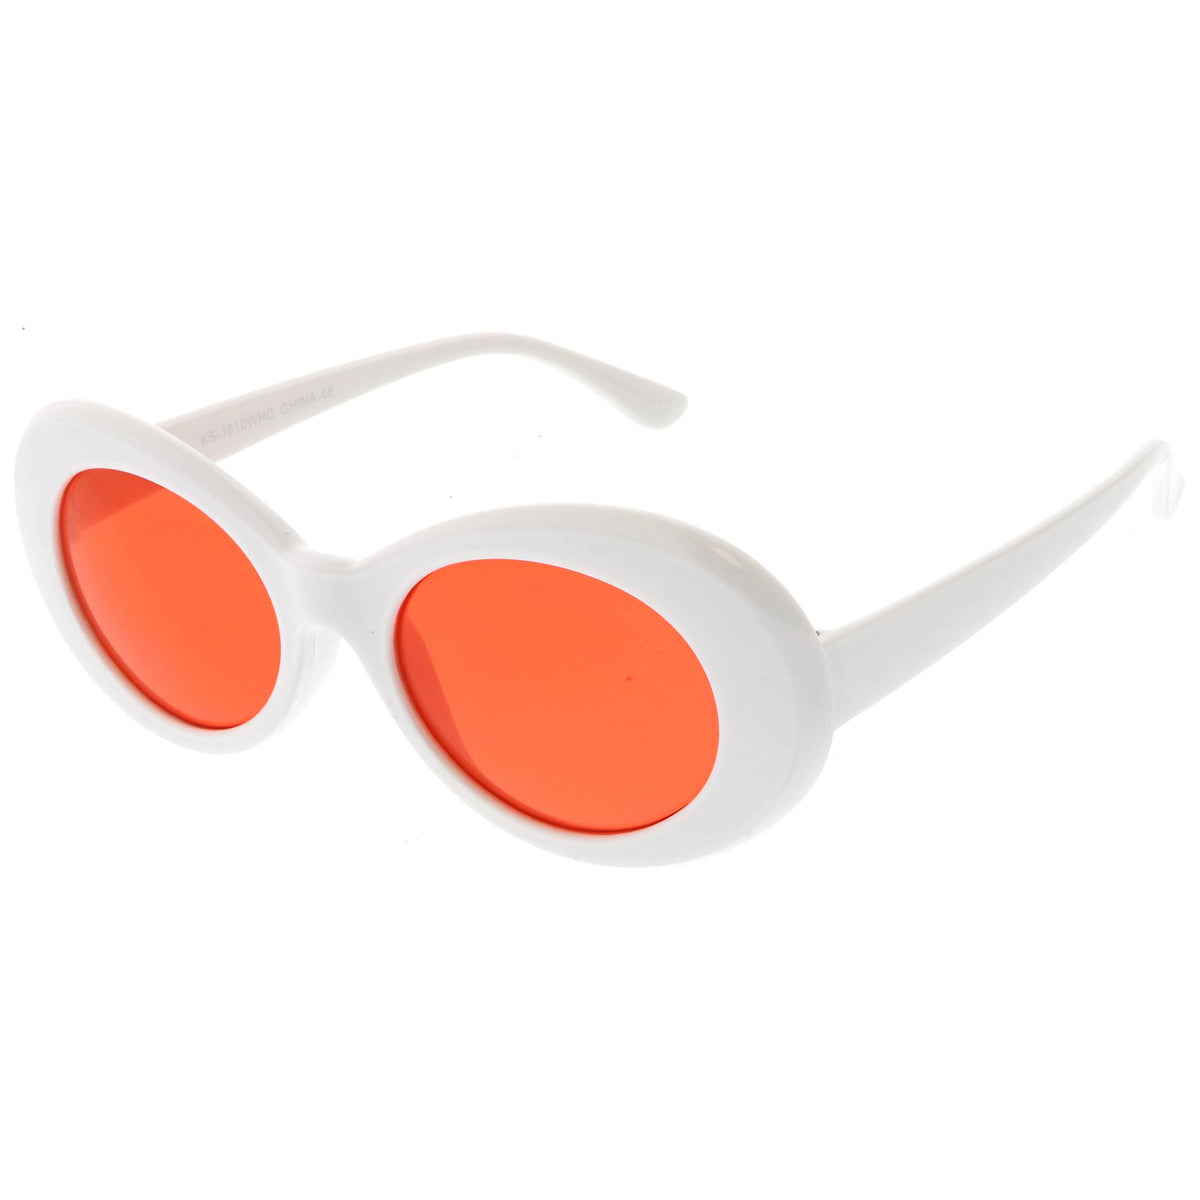 Retro Oval Sunglasses With Tapered Arms Colored Lens 50mm Sunglassla 